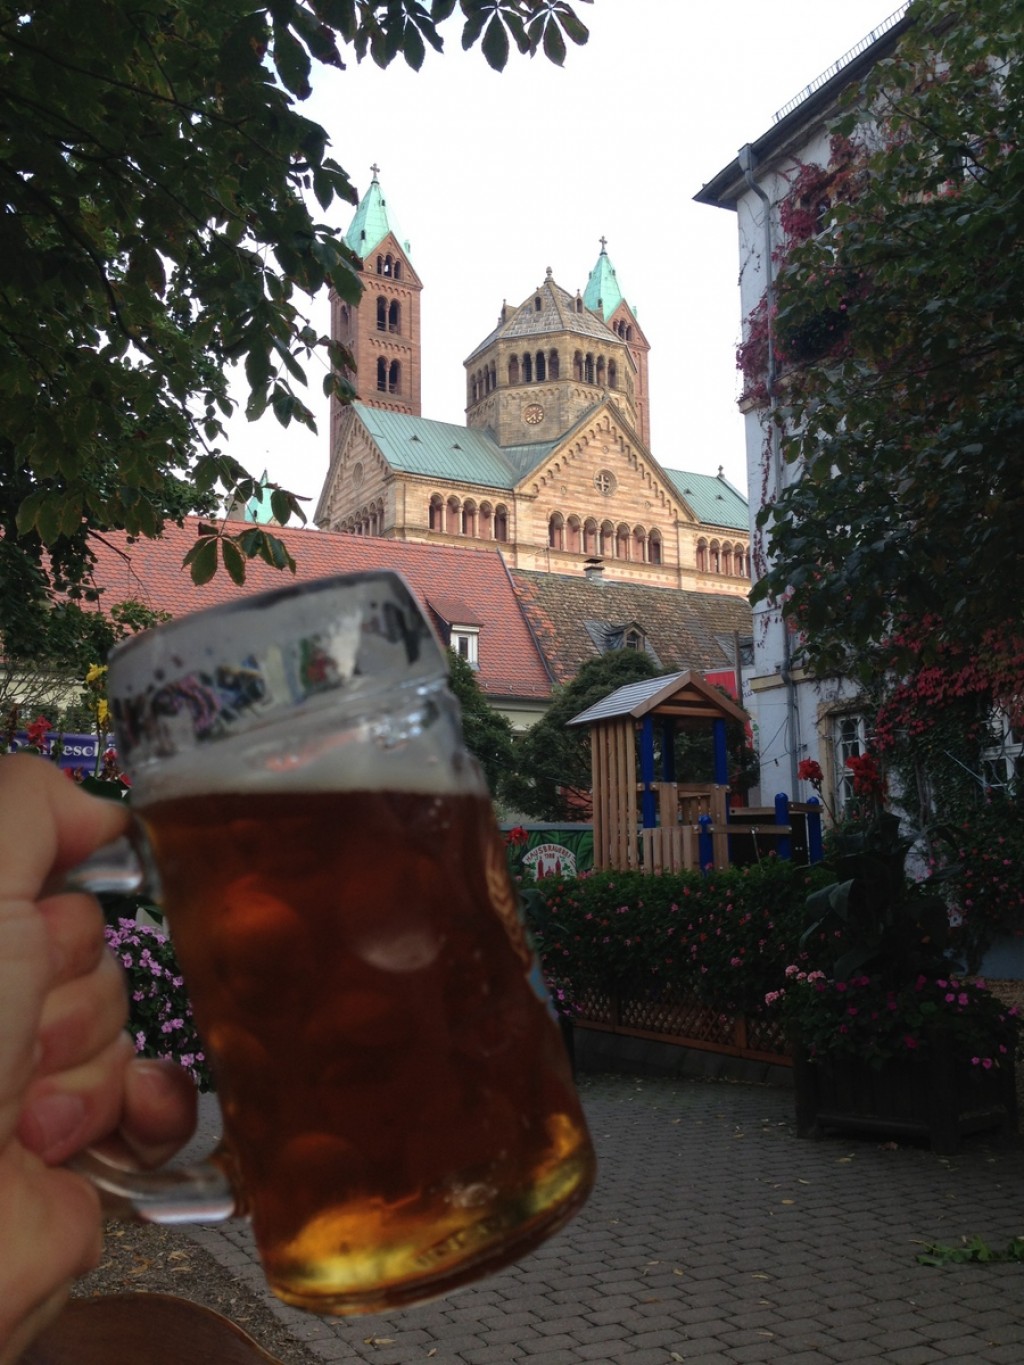 Happiness is a beer garden with a perfect view of an enclosed playground.  Oh, and an amazing cathedral in the background for good measure.